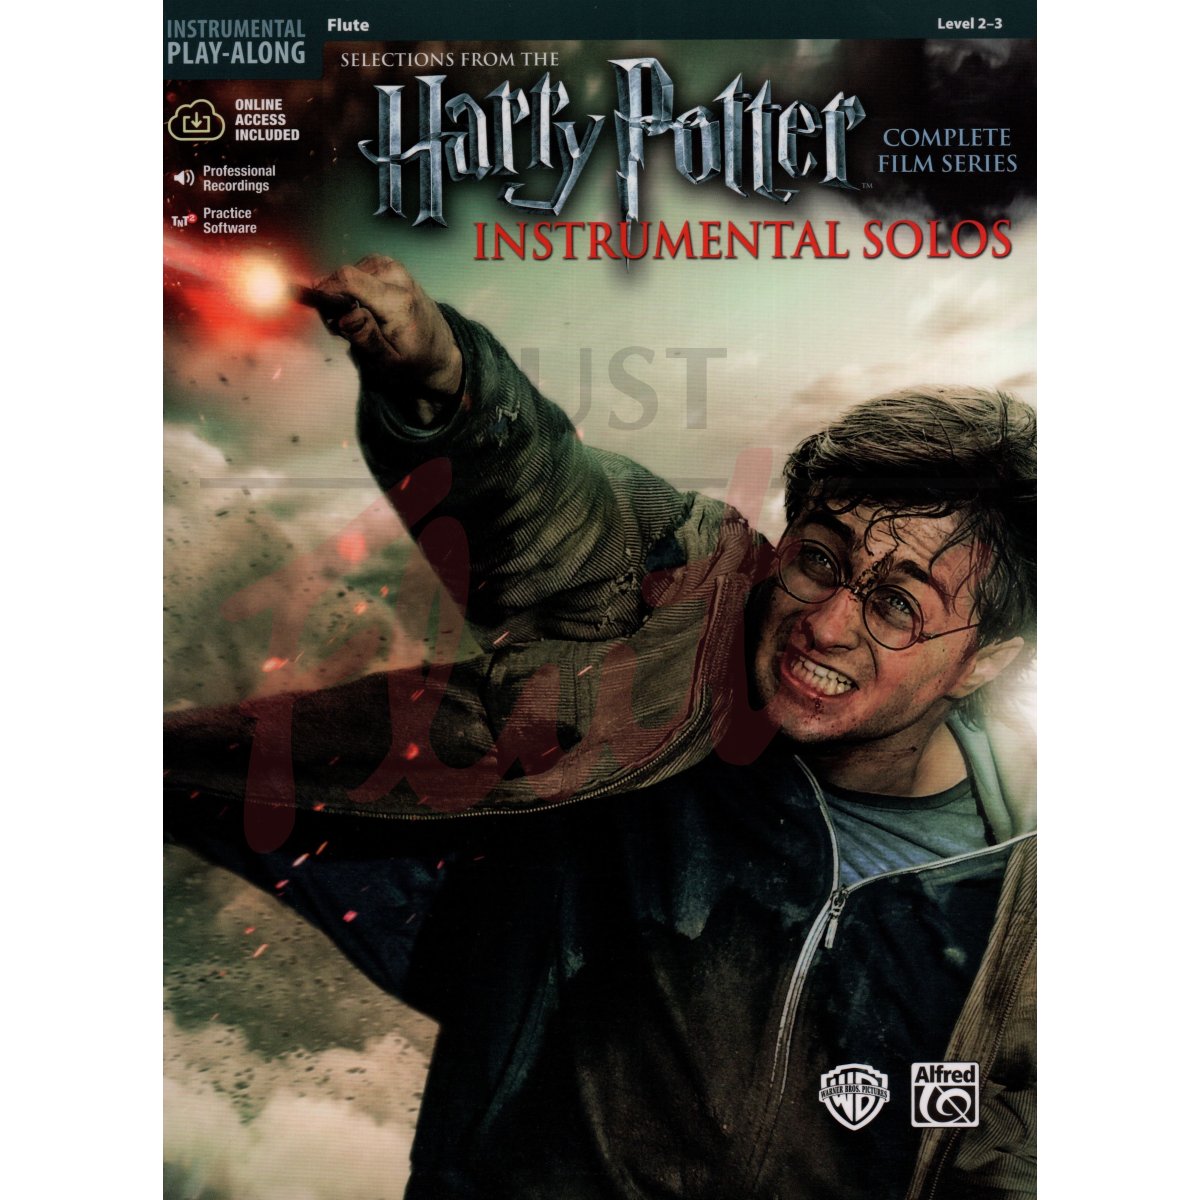 Selections from the Harry Potter Complete Film Series: Instrumental Solos for Flute